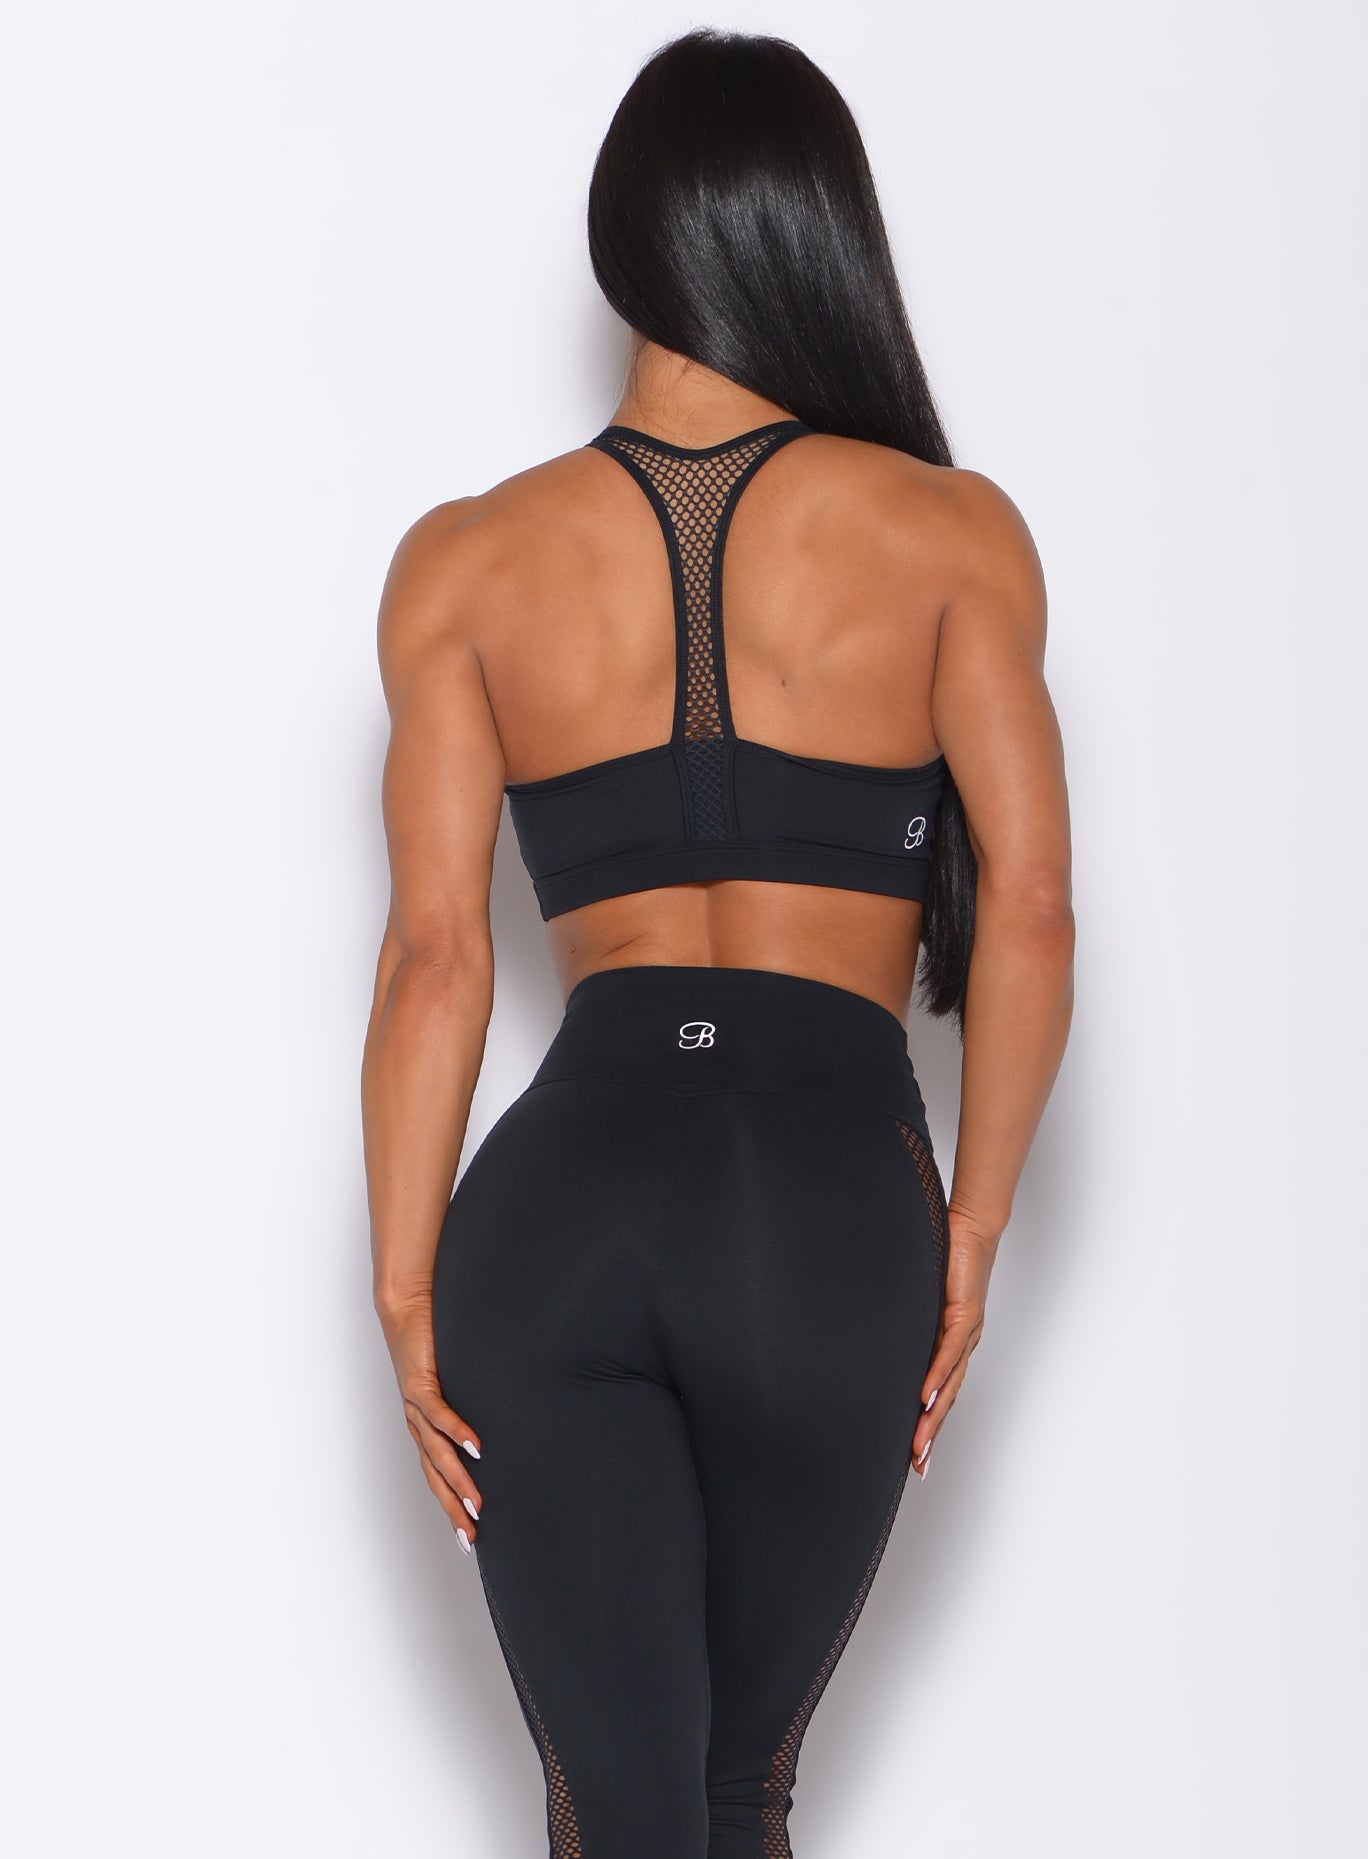 Back profile view of a model wearing our black Attitude Sports Bra and a matching mohawk leggings